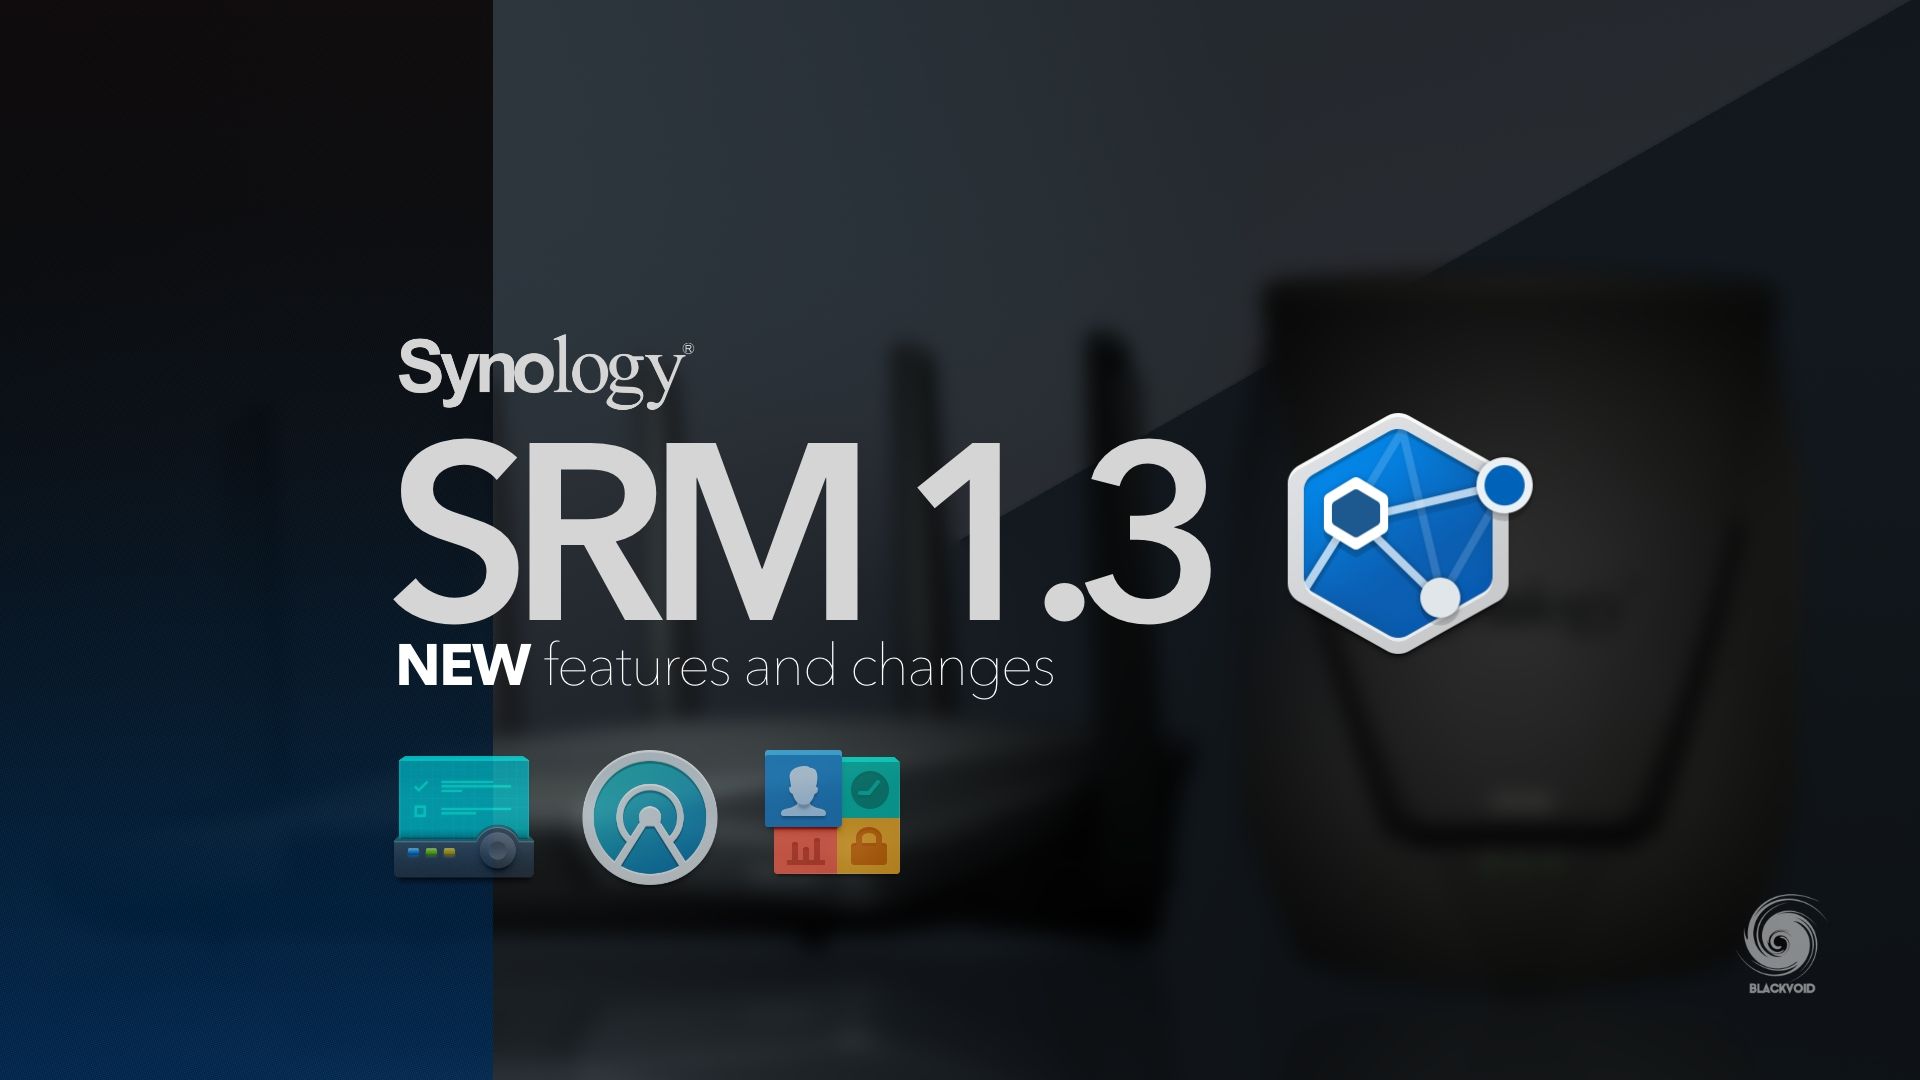 Synology SRM 1.3 - new features and changes